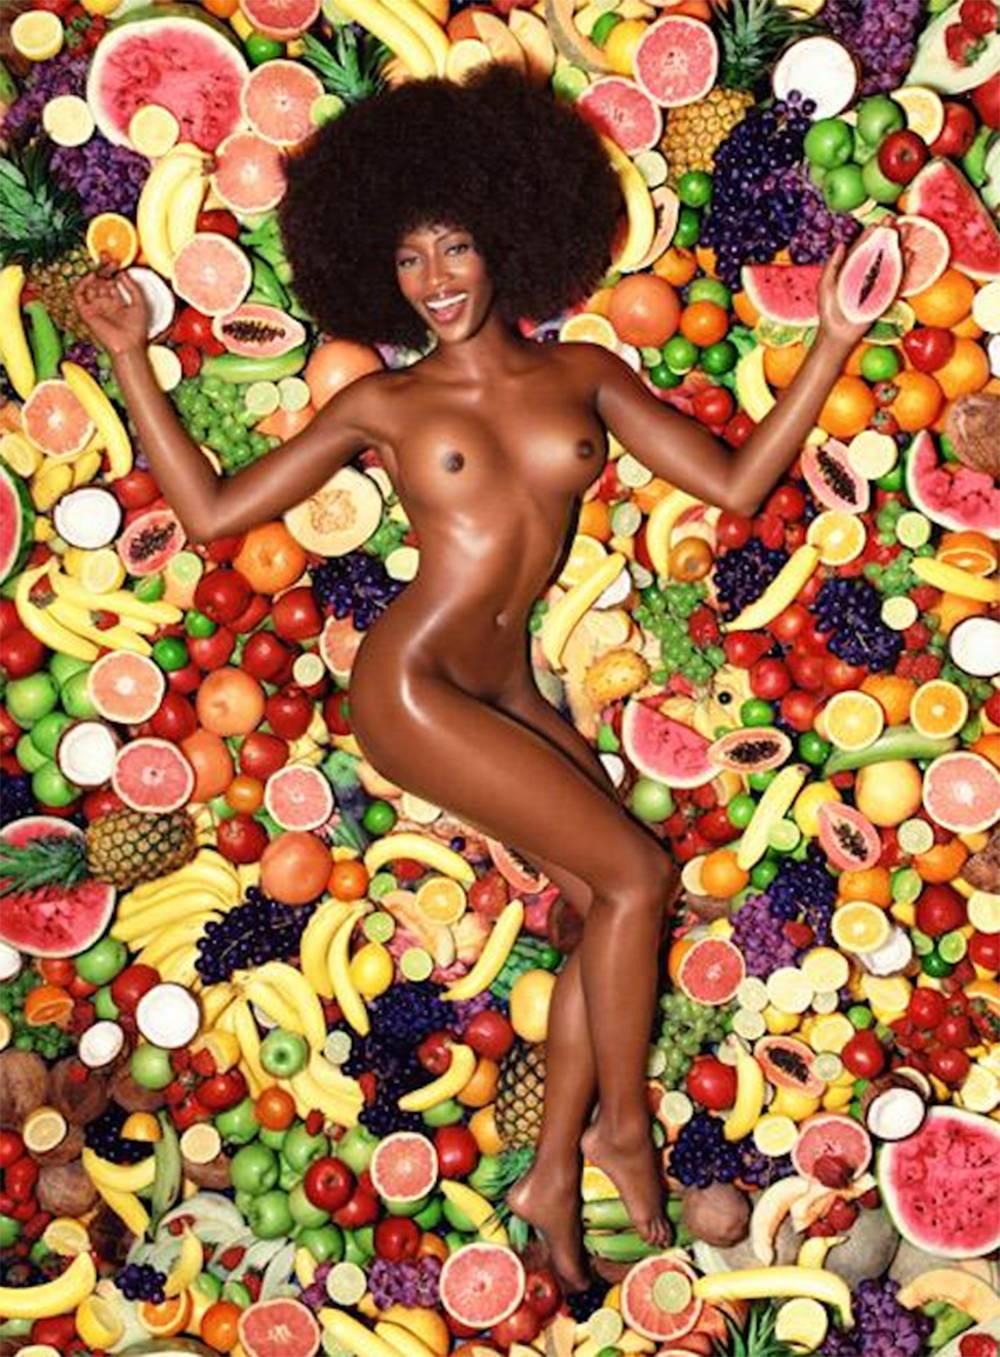 Naomi Campbell: Fruit, 1999 - Photograph by David LaChapelle